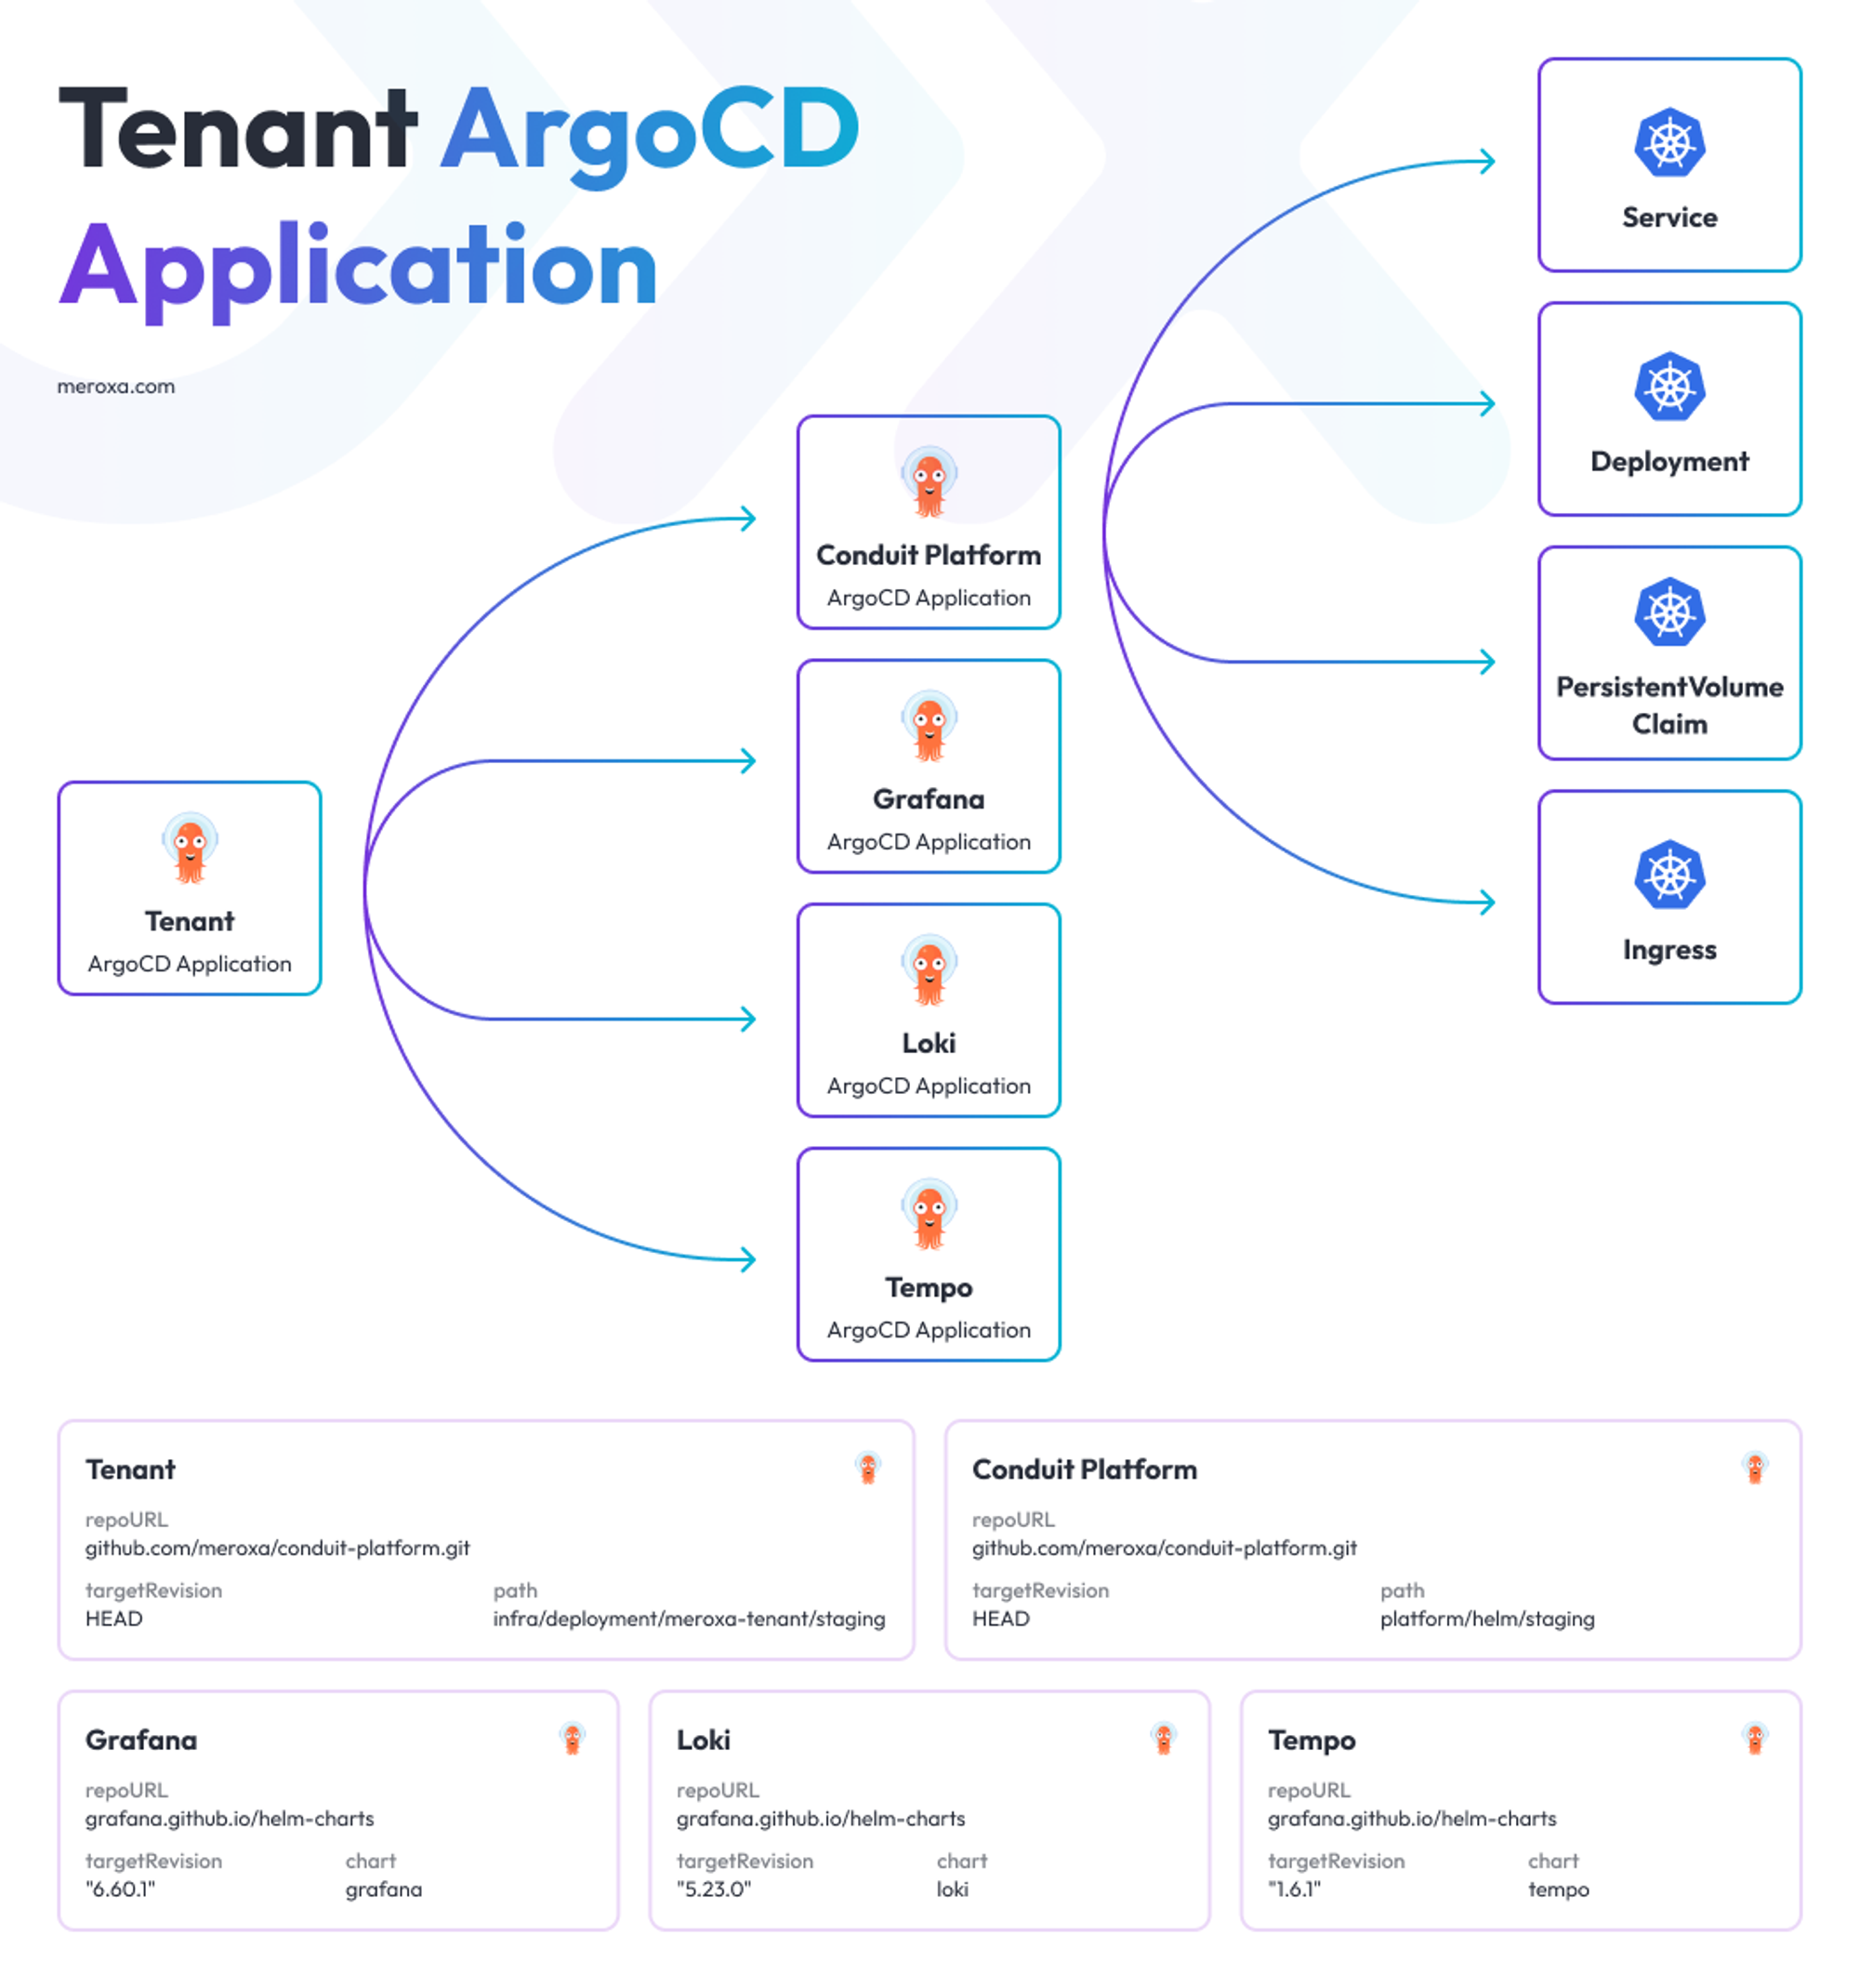 Diagram of a Tenant ArgoCD Application. Note that there is a hierarchy, where the Conduit Platform is a child App of the Tenant ArgoCD App.
